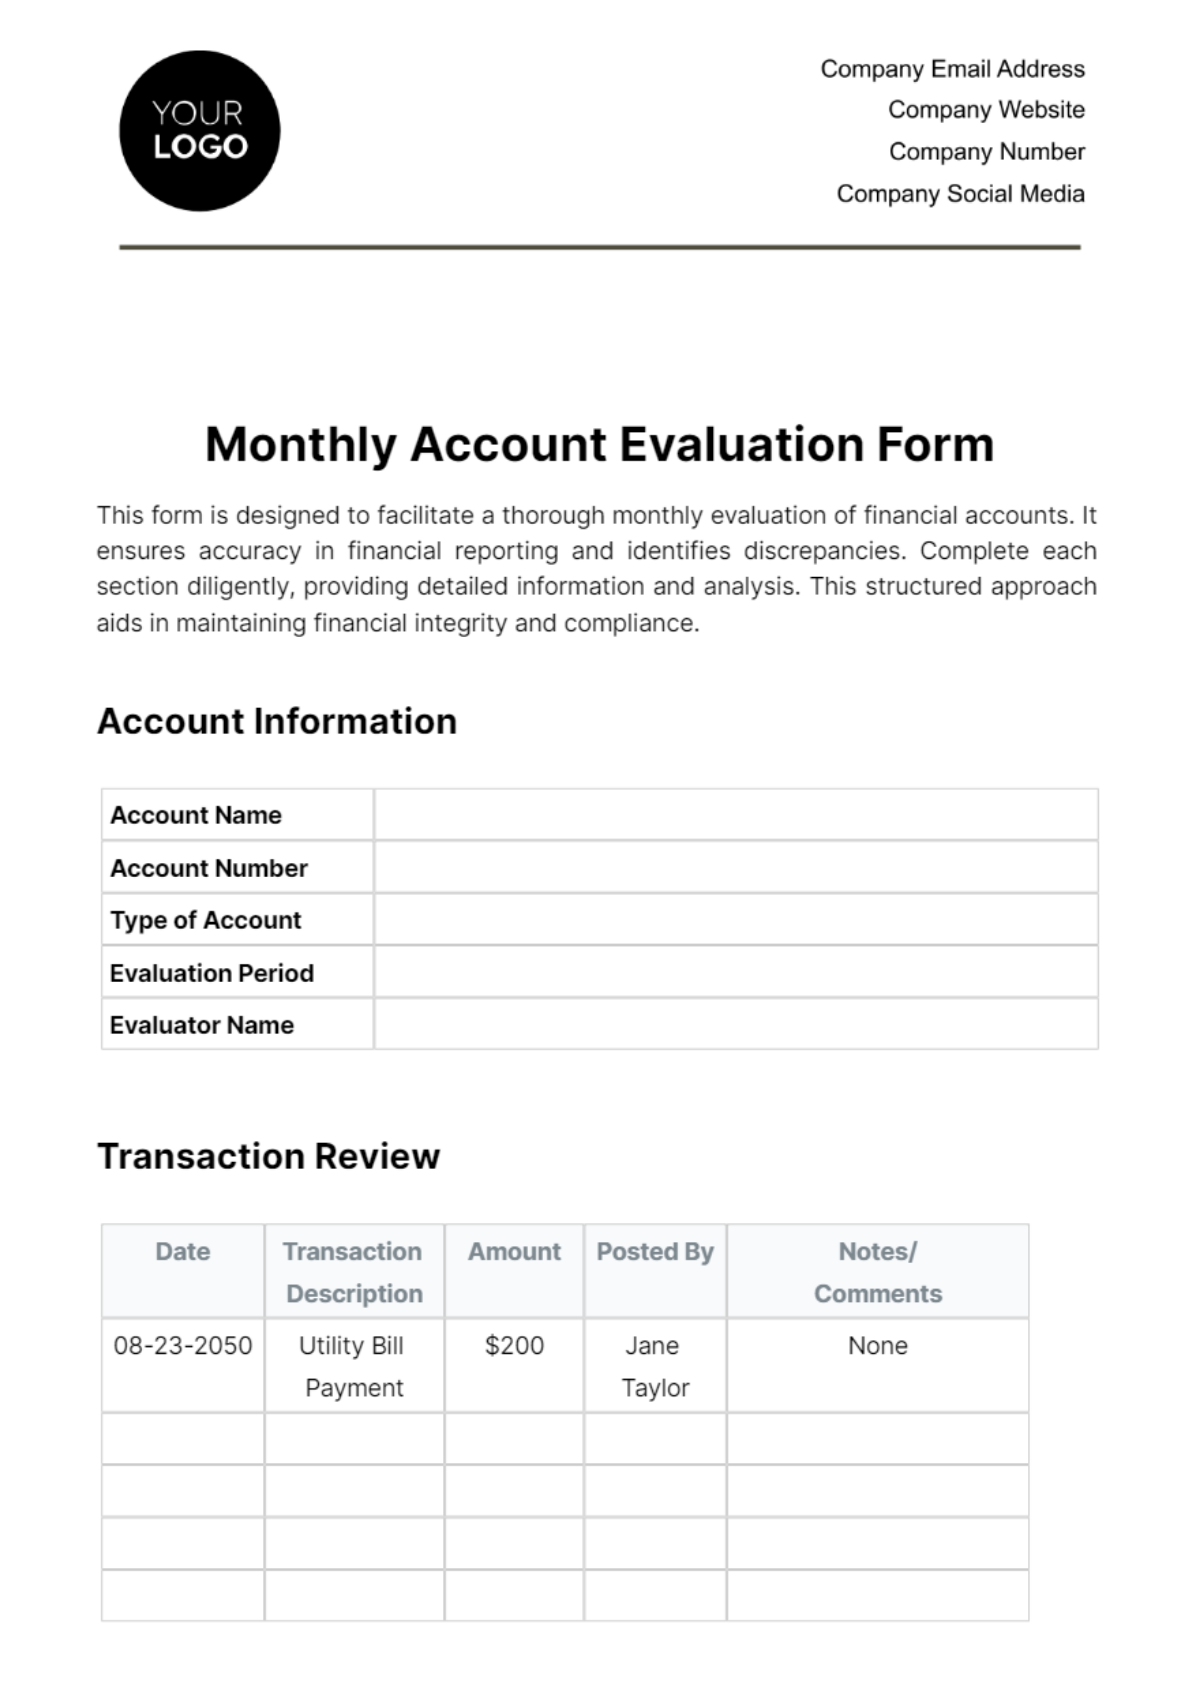 Monthly Account Evaluation Form Template